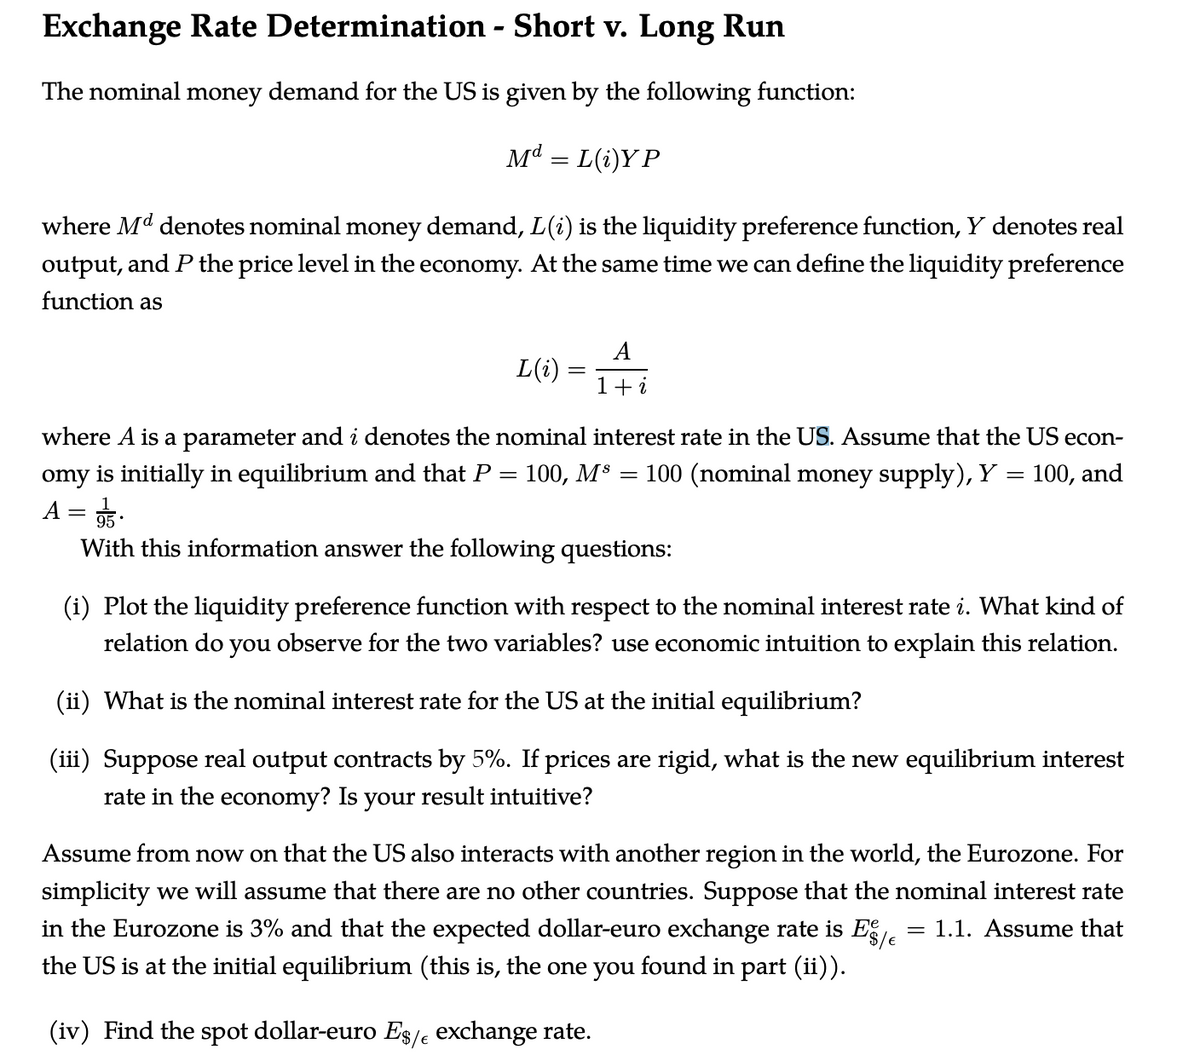 Exchange Rate Determination - Short v. Long Run
The nominal money demand for the US is given by the following function:
Md = L(i)Y P
where Md denotes nominal money demand, L(i) is the liquidity preference function, Y denotes real
output, and P the price level in the economy. At the same time we can define the liquidity preference
function as
A
L(i)
1+i
where A is a parameter and i denotes the nominal interest rate in the US. Assume that the US econ-
omy is initially in equilibrium and that P
A = 5.
With this information answer the following questions:
100, M$ =
100 (nominal money supply), Y = 100, and
%3D
(i) Plot the liquidity preference function with respect to the nominal interest rate i. What kind of
relation do you observe for the two variables? use economic intuition to explain this relation.
(ii) What is the nominal interest rate for the US at the initial equilibrium?
(iii) Suppose real output contracts by 5%. If prices are rigid, what is the new equilibrium interest
rate in the economy? Is your result intuitive?
Assume from now on that the US also interacts with another region in the world, the Eurozone. For
simplicity we will assume that there are no other countries. Suppose that the nominal interest rate
in the Eurozone is 3% and that the expected dollar-euro exchange rate is E.
the US is at the initial equilibrium (this is, the one you found in part (ii)).
= 1.1. Assume that
(iv) Find the spot dollar-euro Es/e exchange rate.
